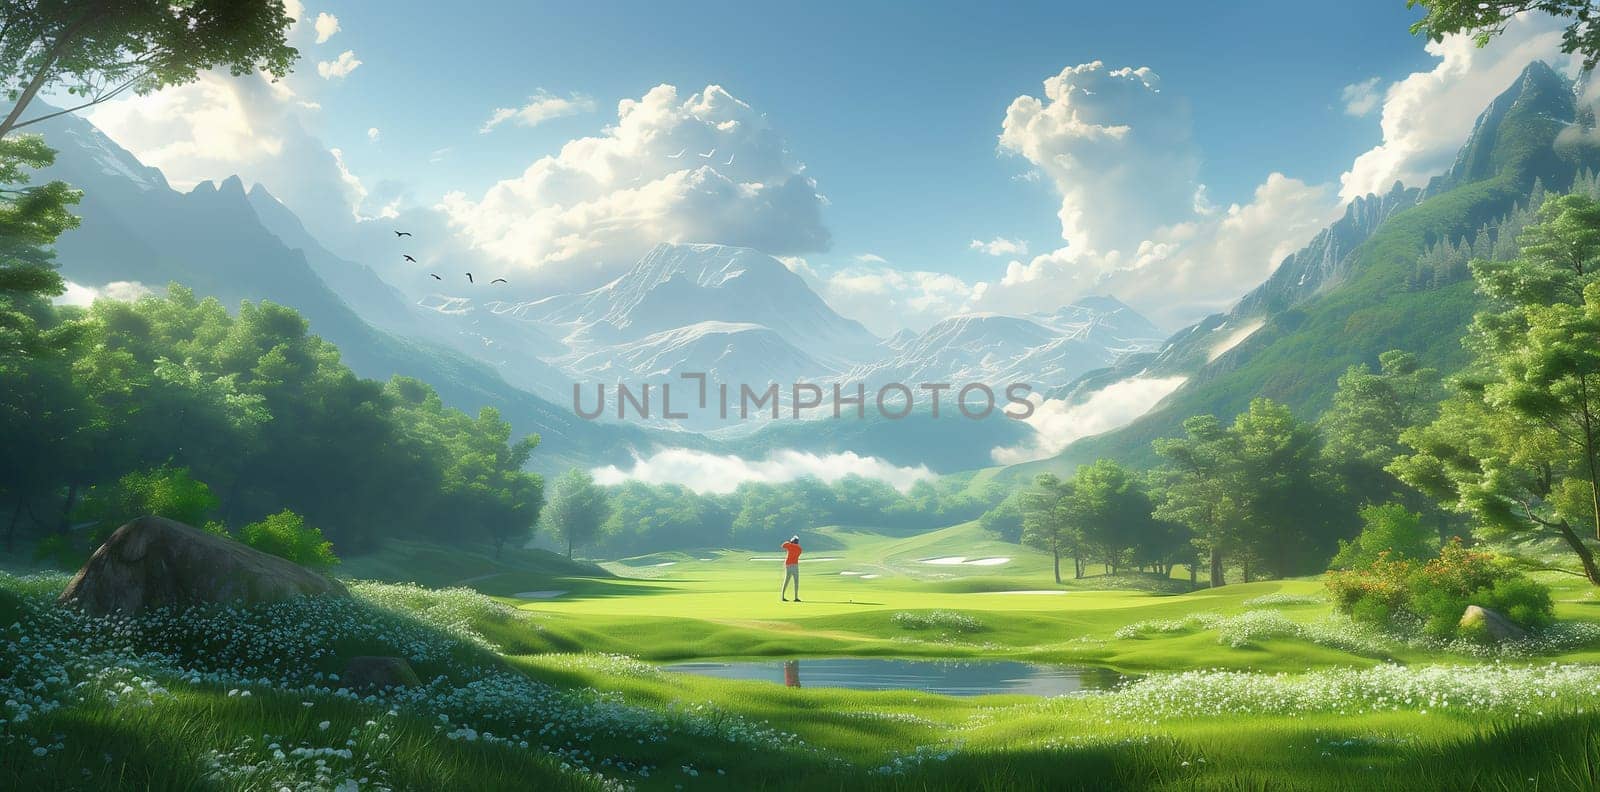 Natural landscape in anime style illustration art. High quality photo